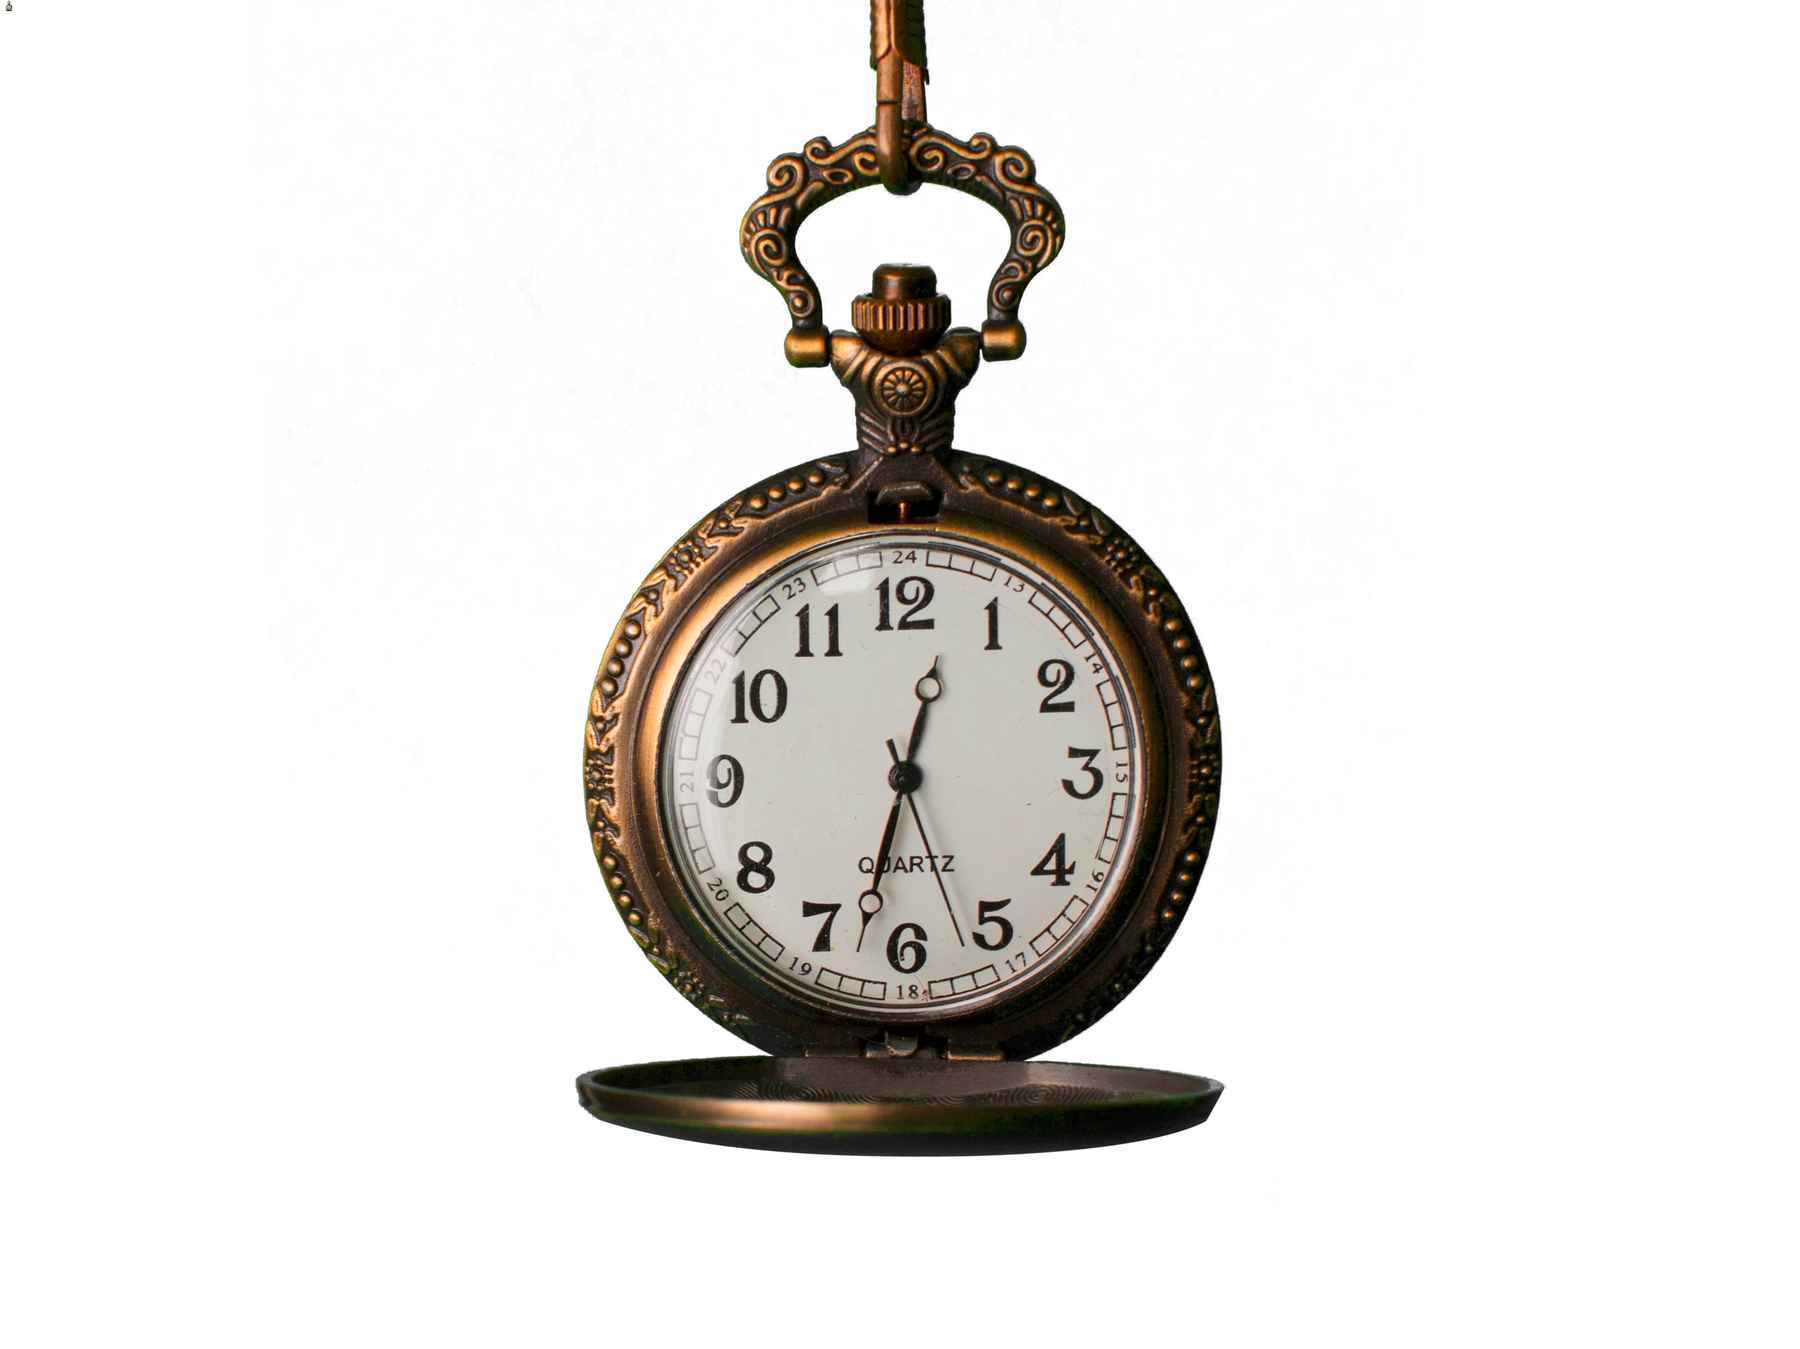 Vintage metal pocket watch hanging on a chain.